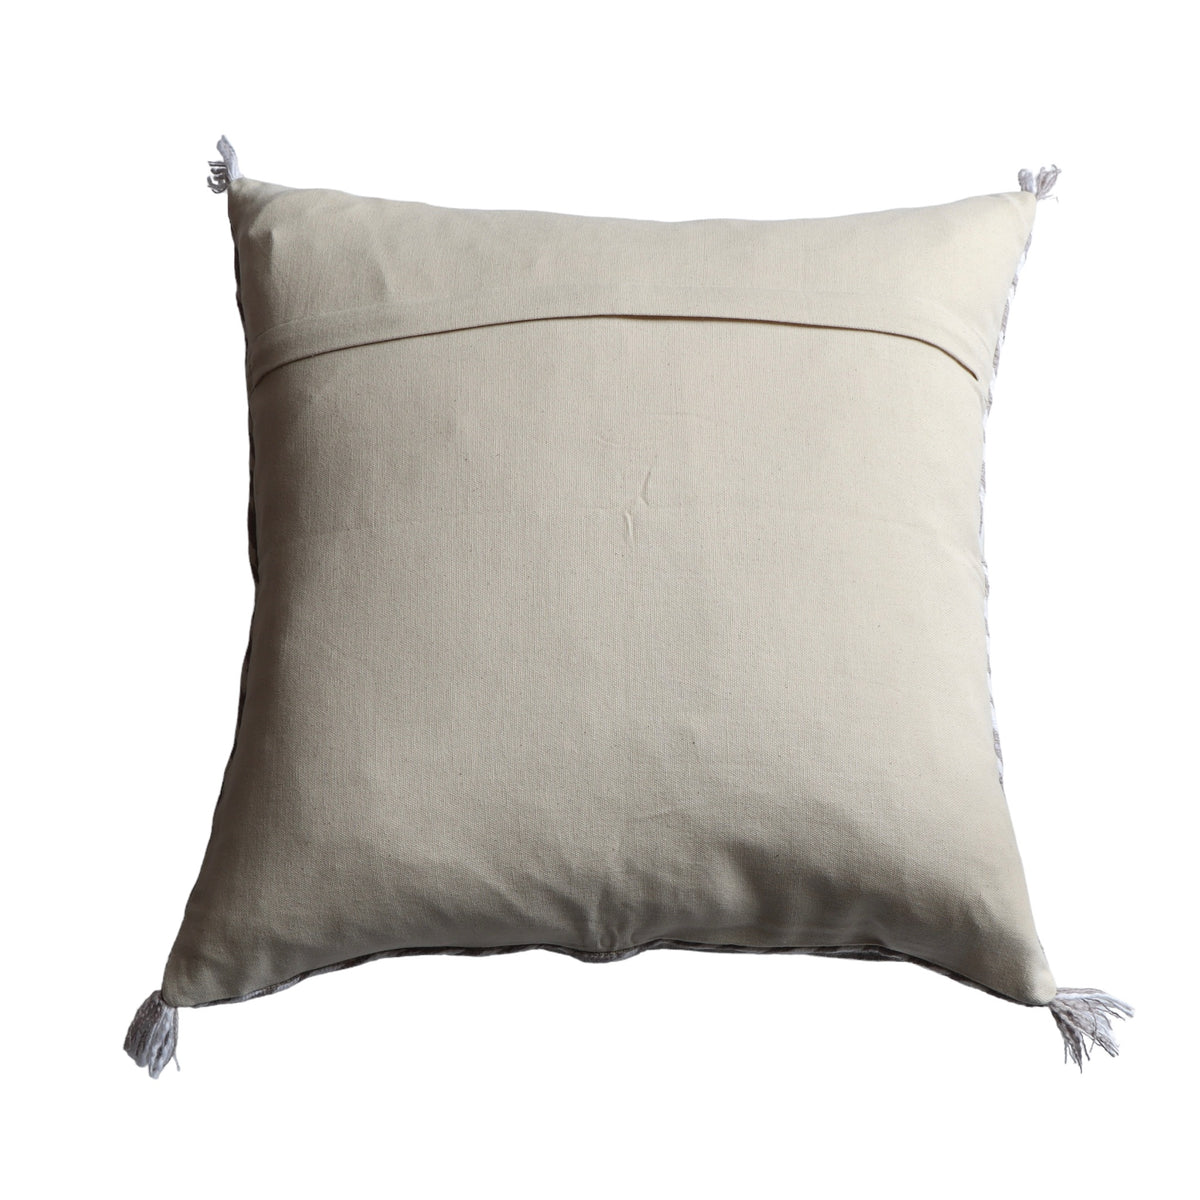 Salma Gray Cotton Embroidered Pillow Cover - 20 Inch - Holistic Habitat 